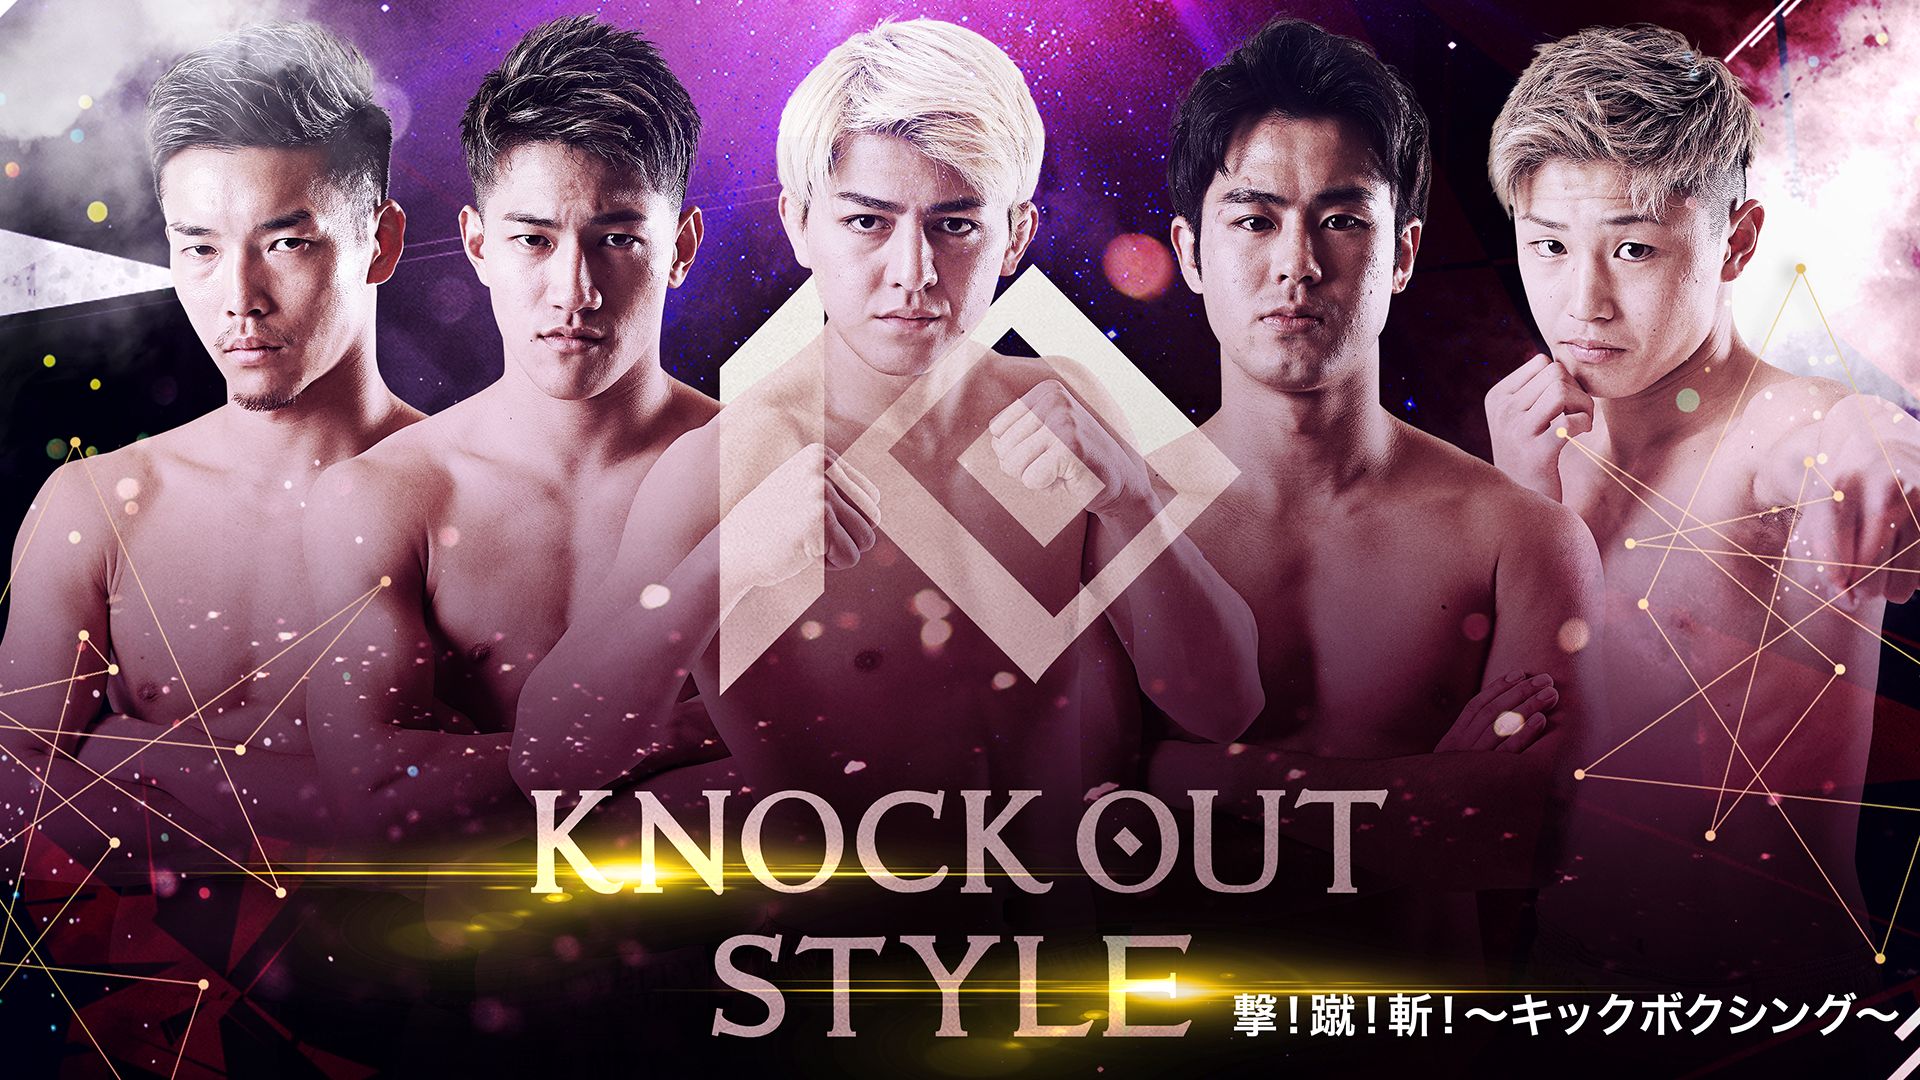 KNOCK OUT STYLE 撃！蹴！斬！〜キックボクシング〜